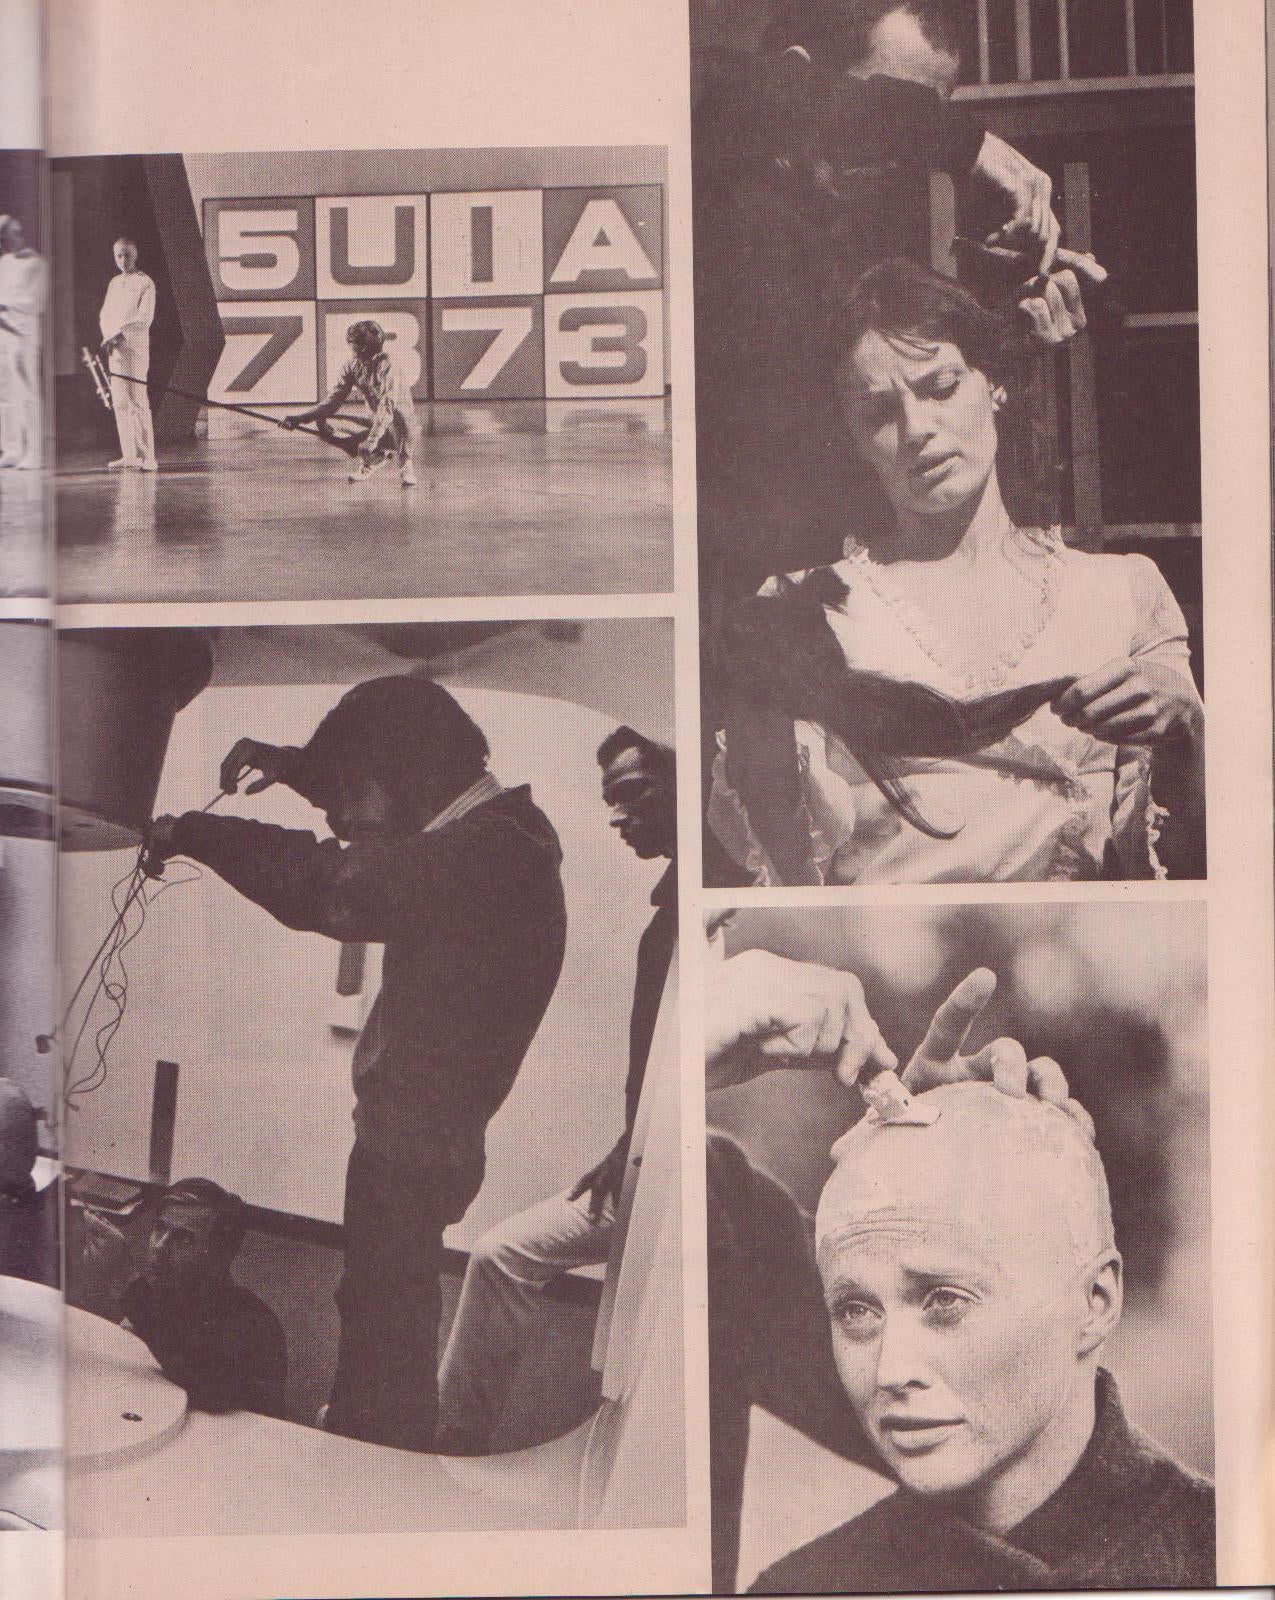 Knight November 1970 -- Unedited Chapter from Post Office by Charles Bukowski, Plus Spread on  George Lucas and THX 1138